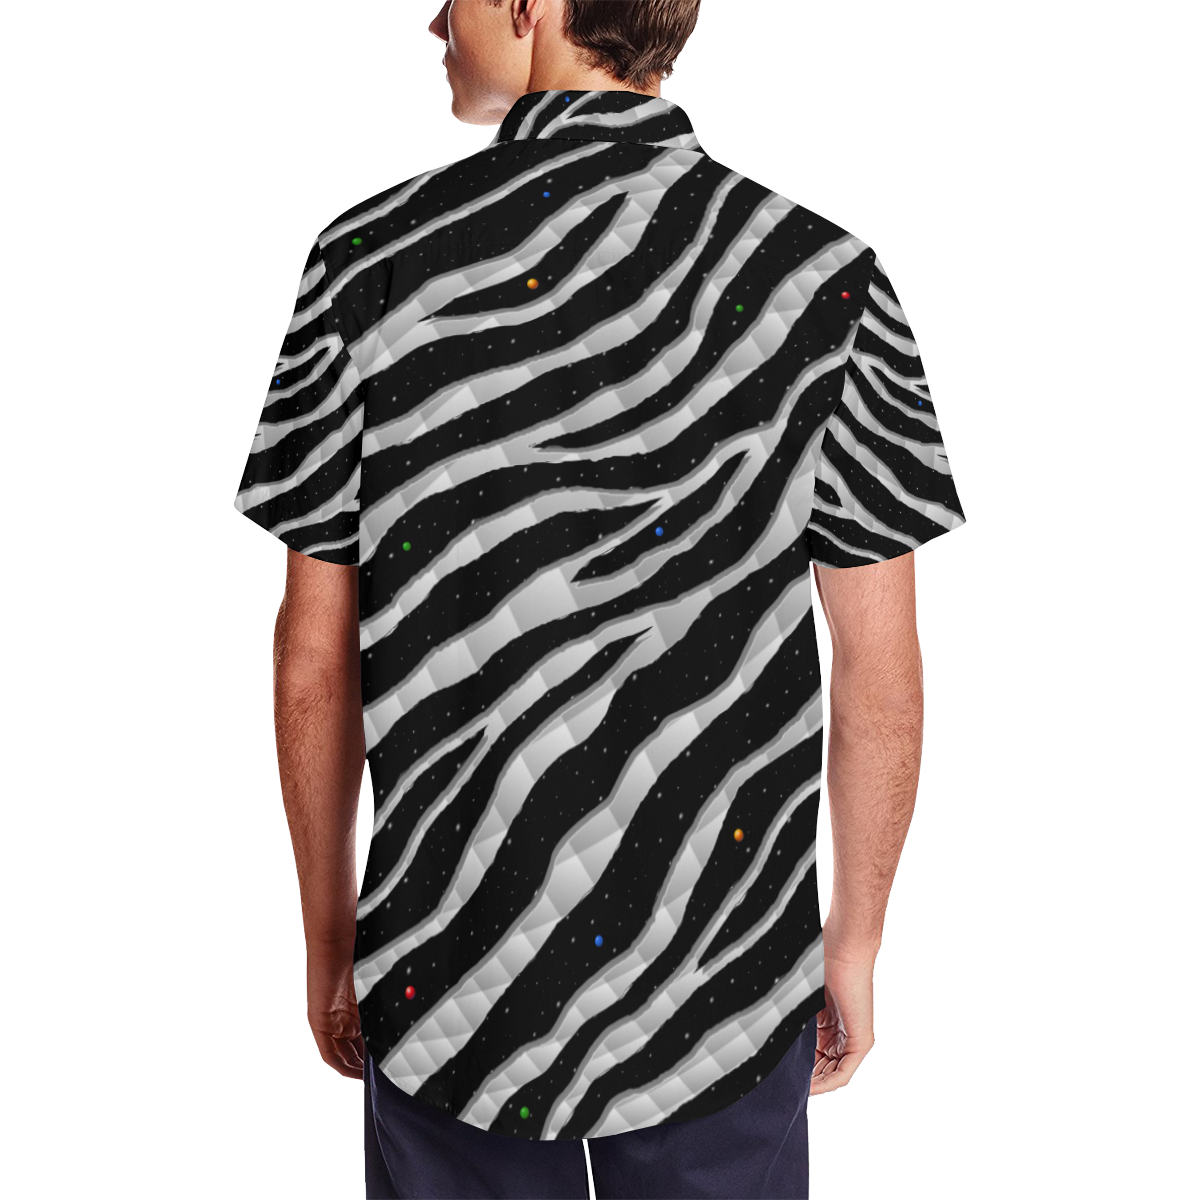 Ripped SpaceTime Stripes - White Men's Short Sleeve Shirt with Lapel Collar (Model T54)